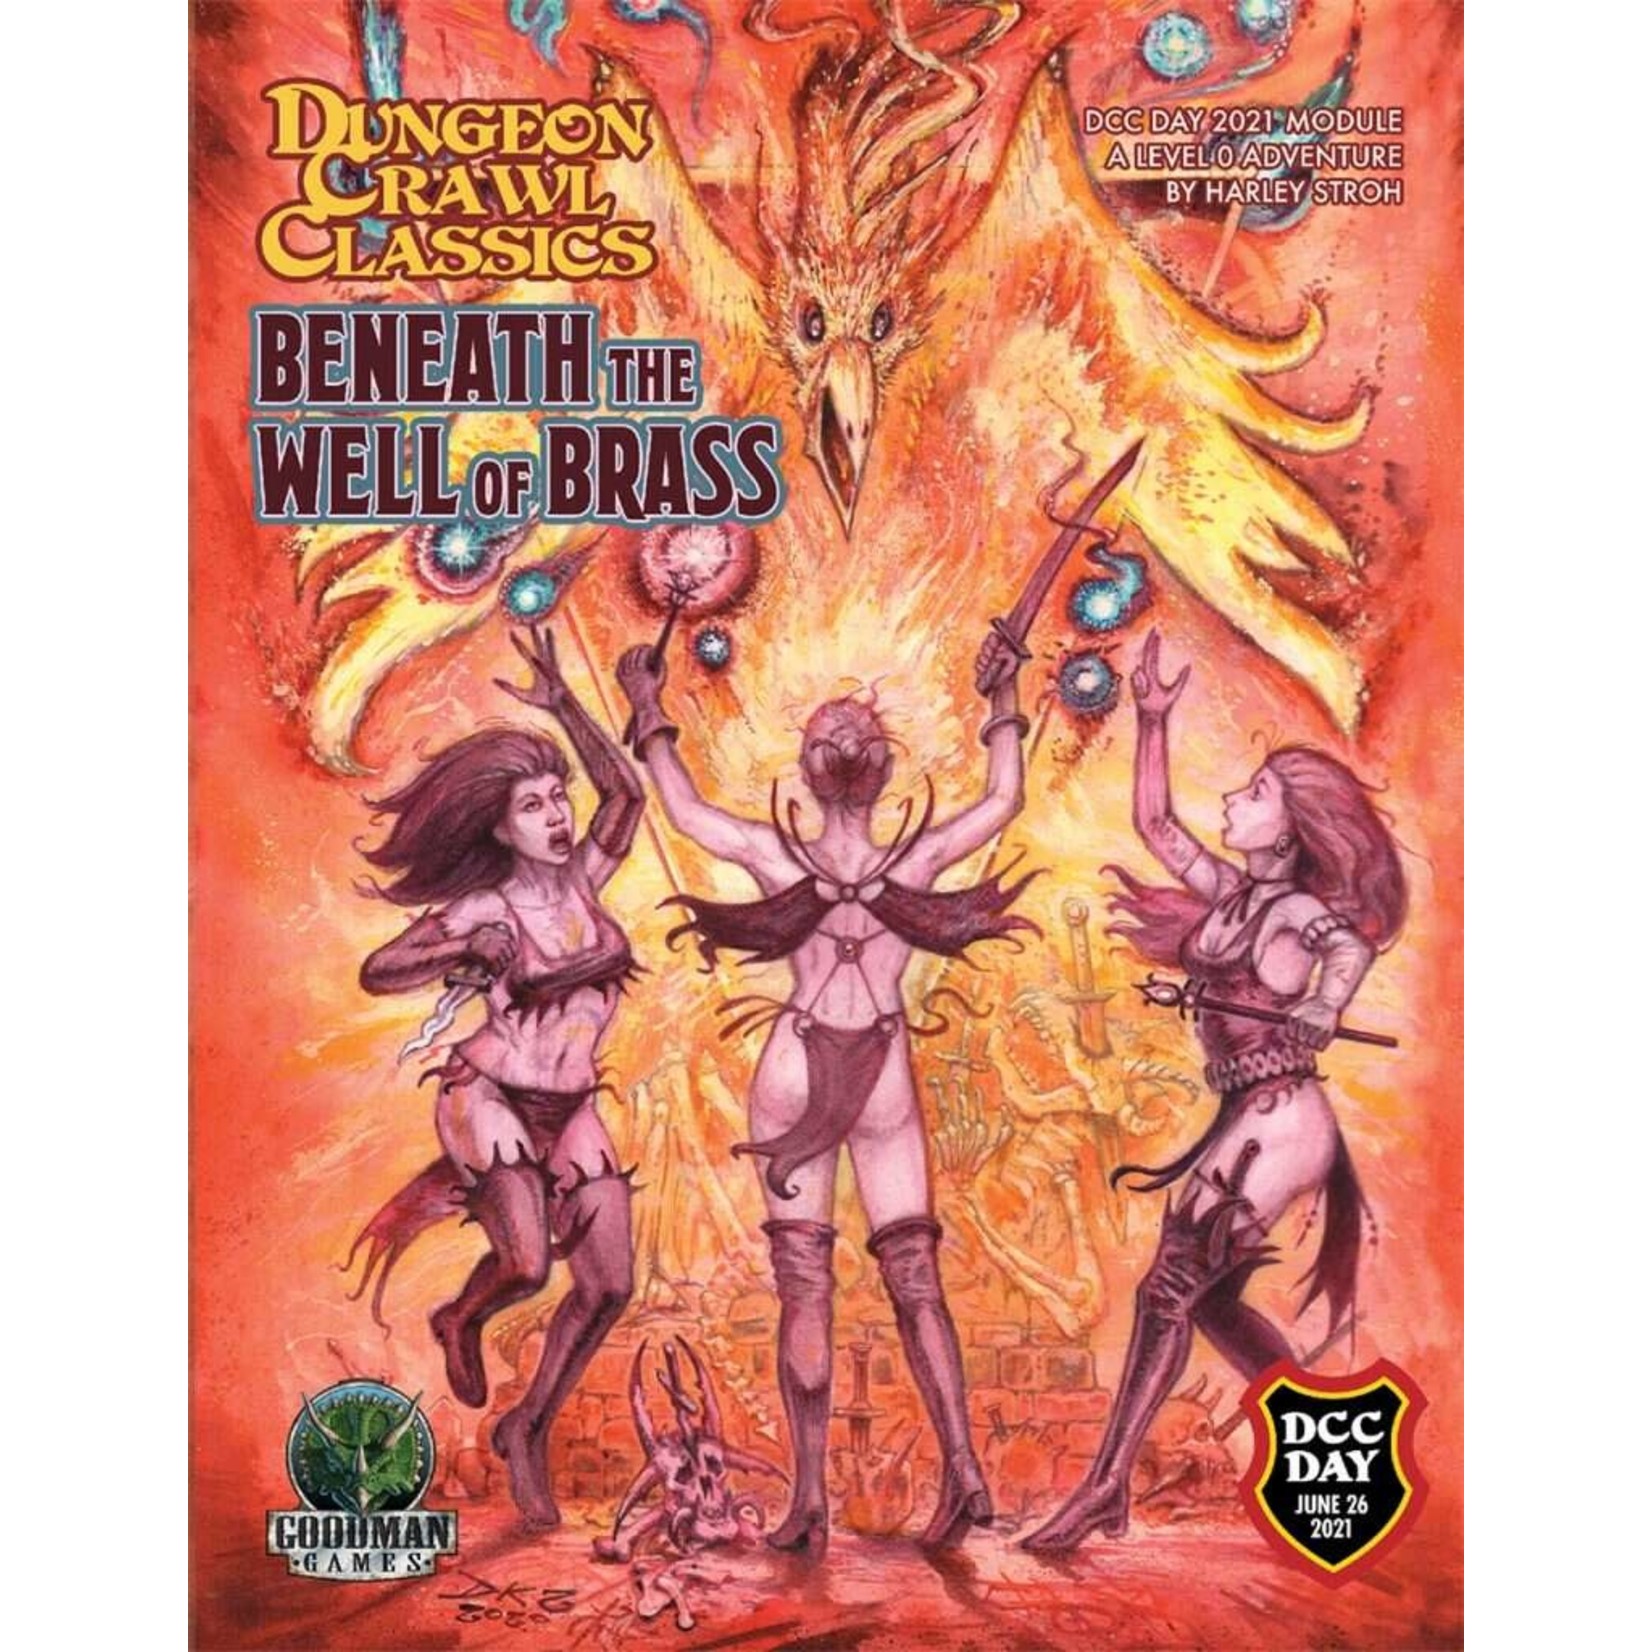 Dungeon Crawl Classics Beneath the Well of Brass